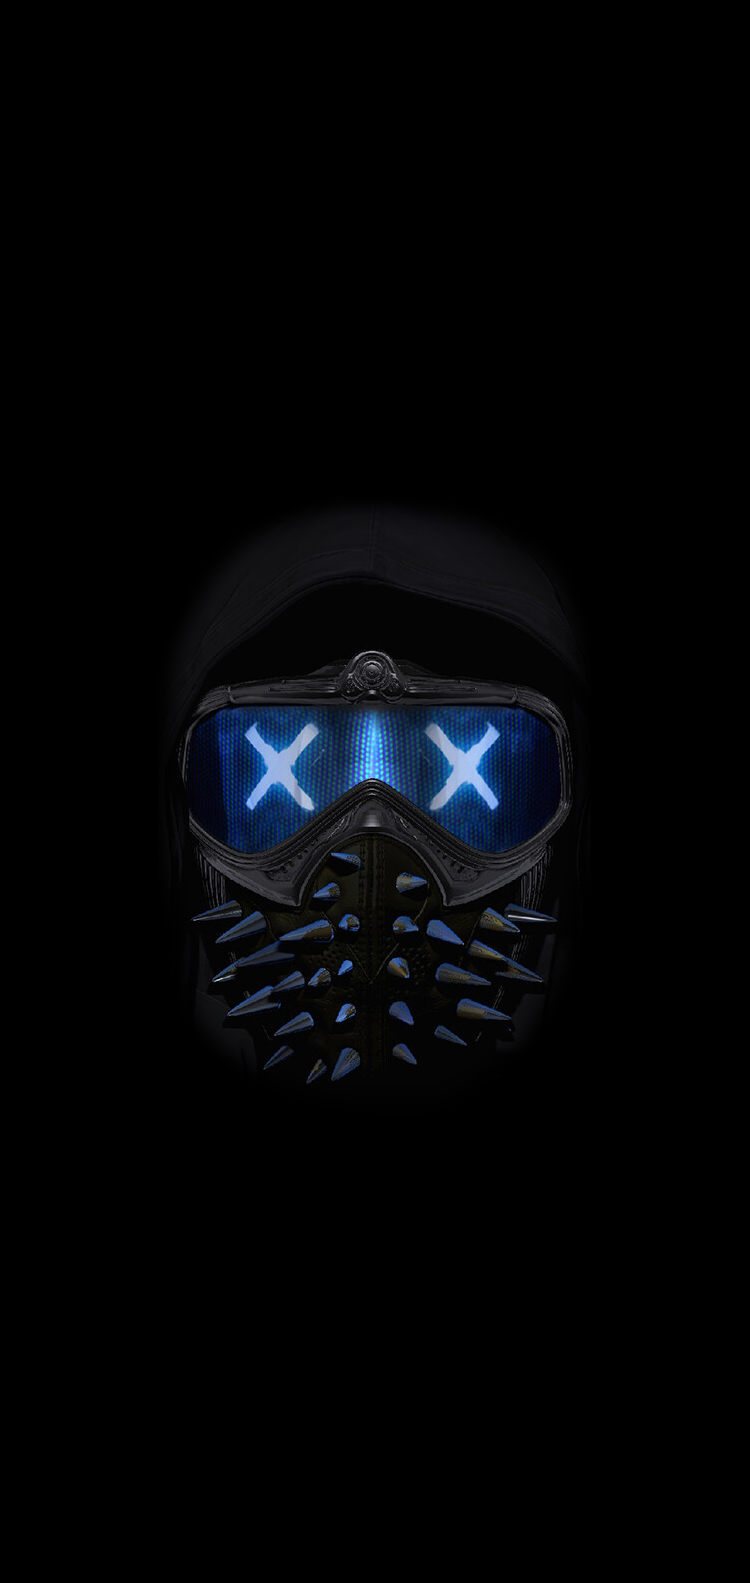 Wrench Watch Dogs 2 Wallpaper Amoled